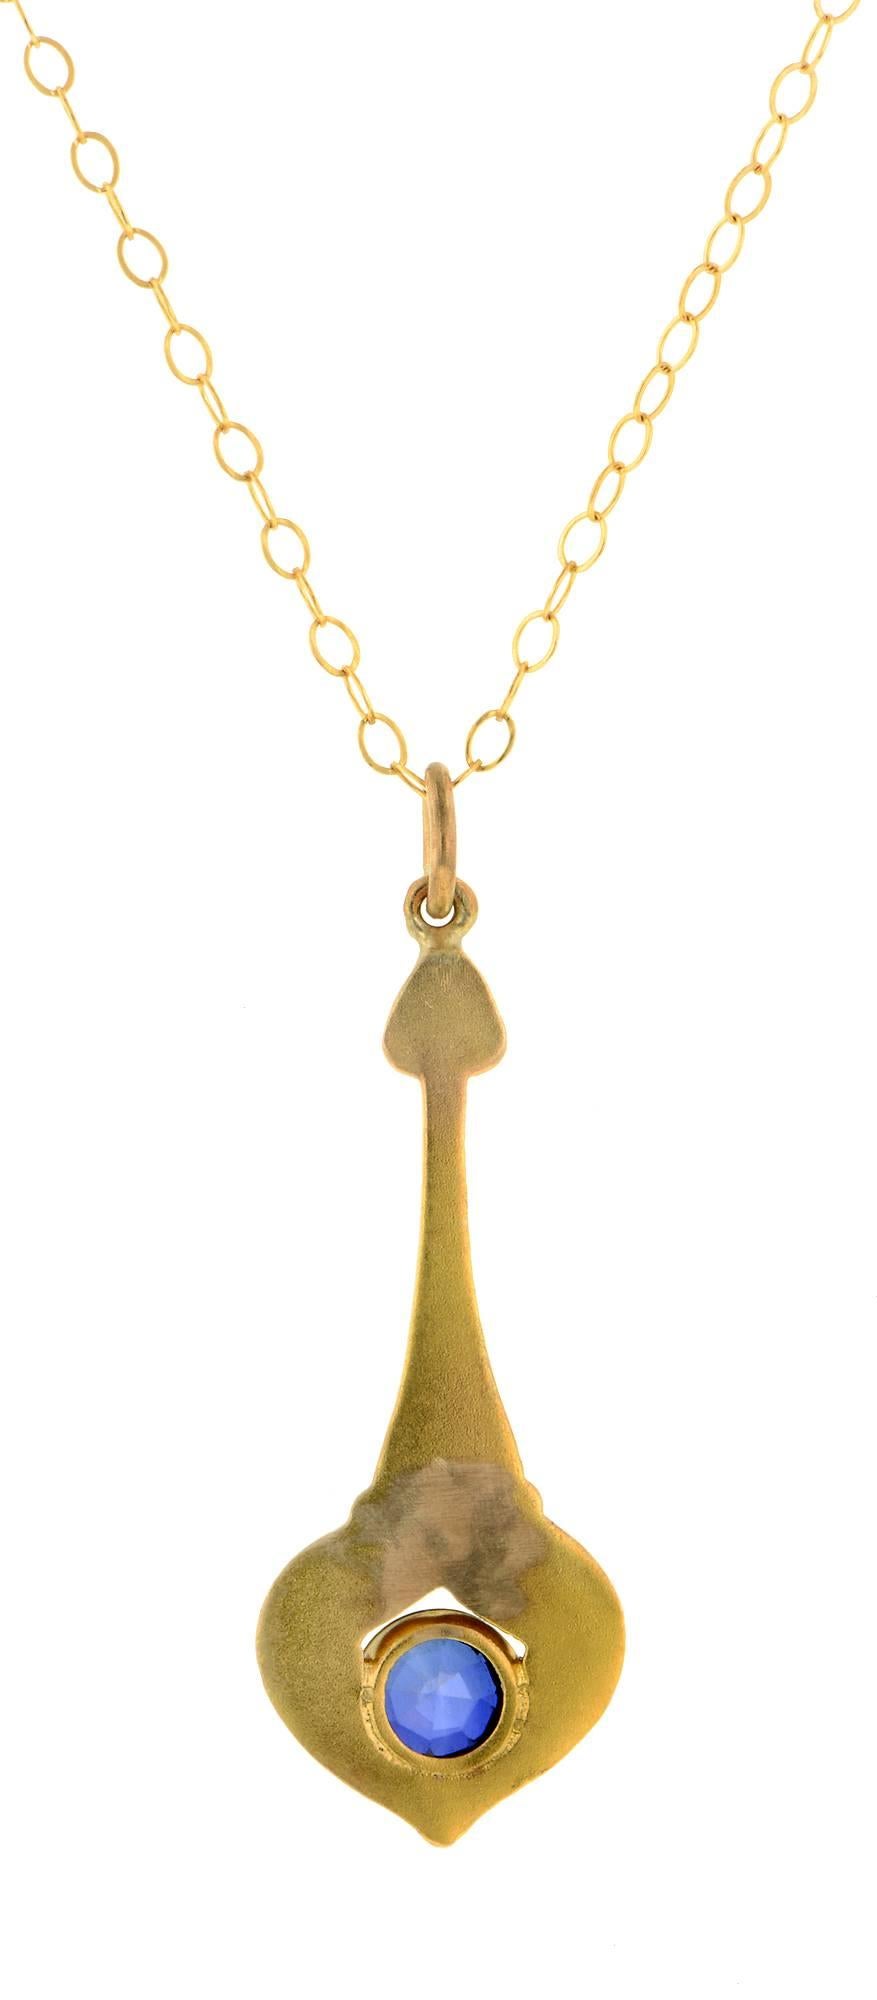 Art Nouveau sapphire drop pendant measuring app. 1 (including bail) x 3/8 inch wide, set with sapphire measuring app. 3.0mm in a pendulum-like design, fashioned in 10k bloomed gold. Suspended from a 16 inch chain. Circa 1900